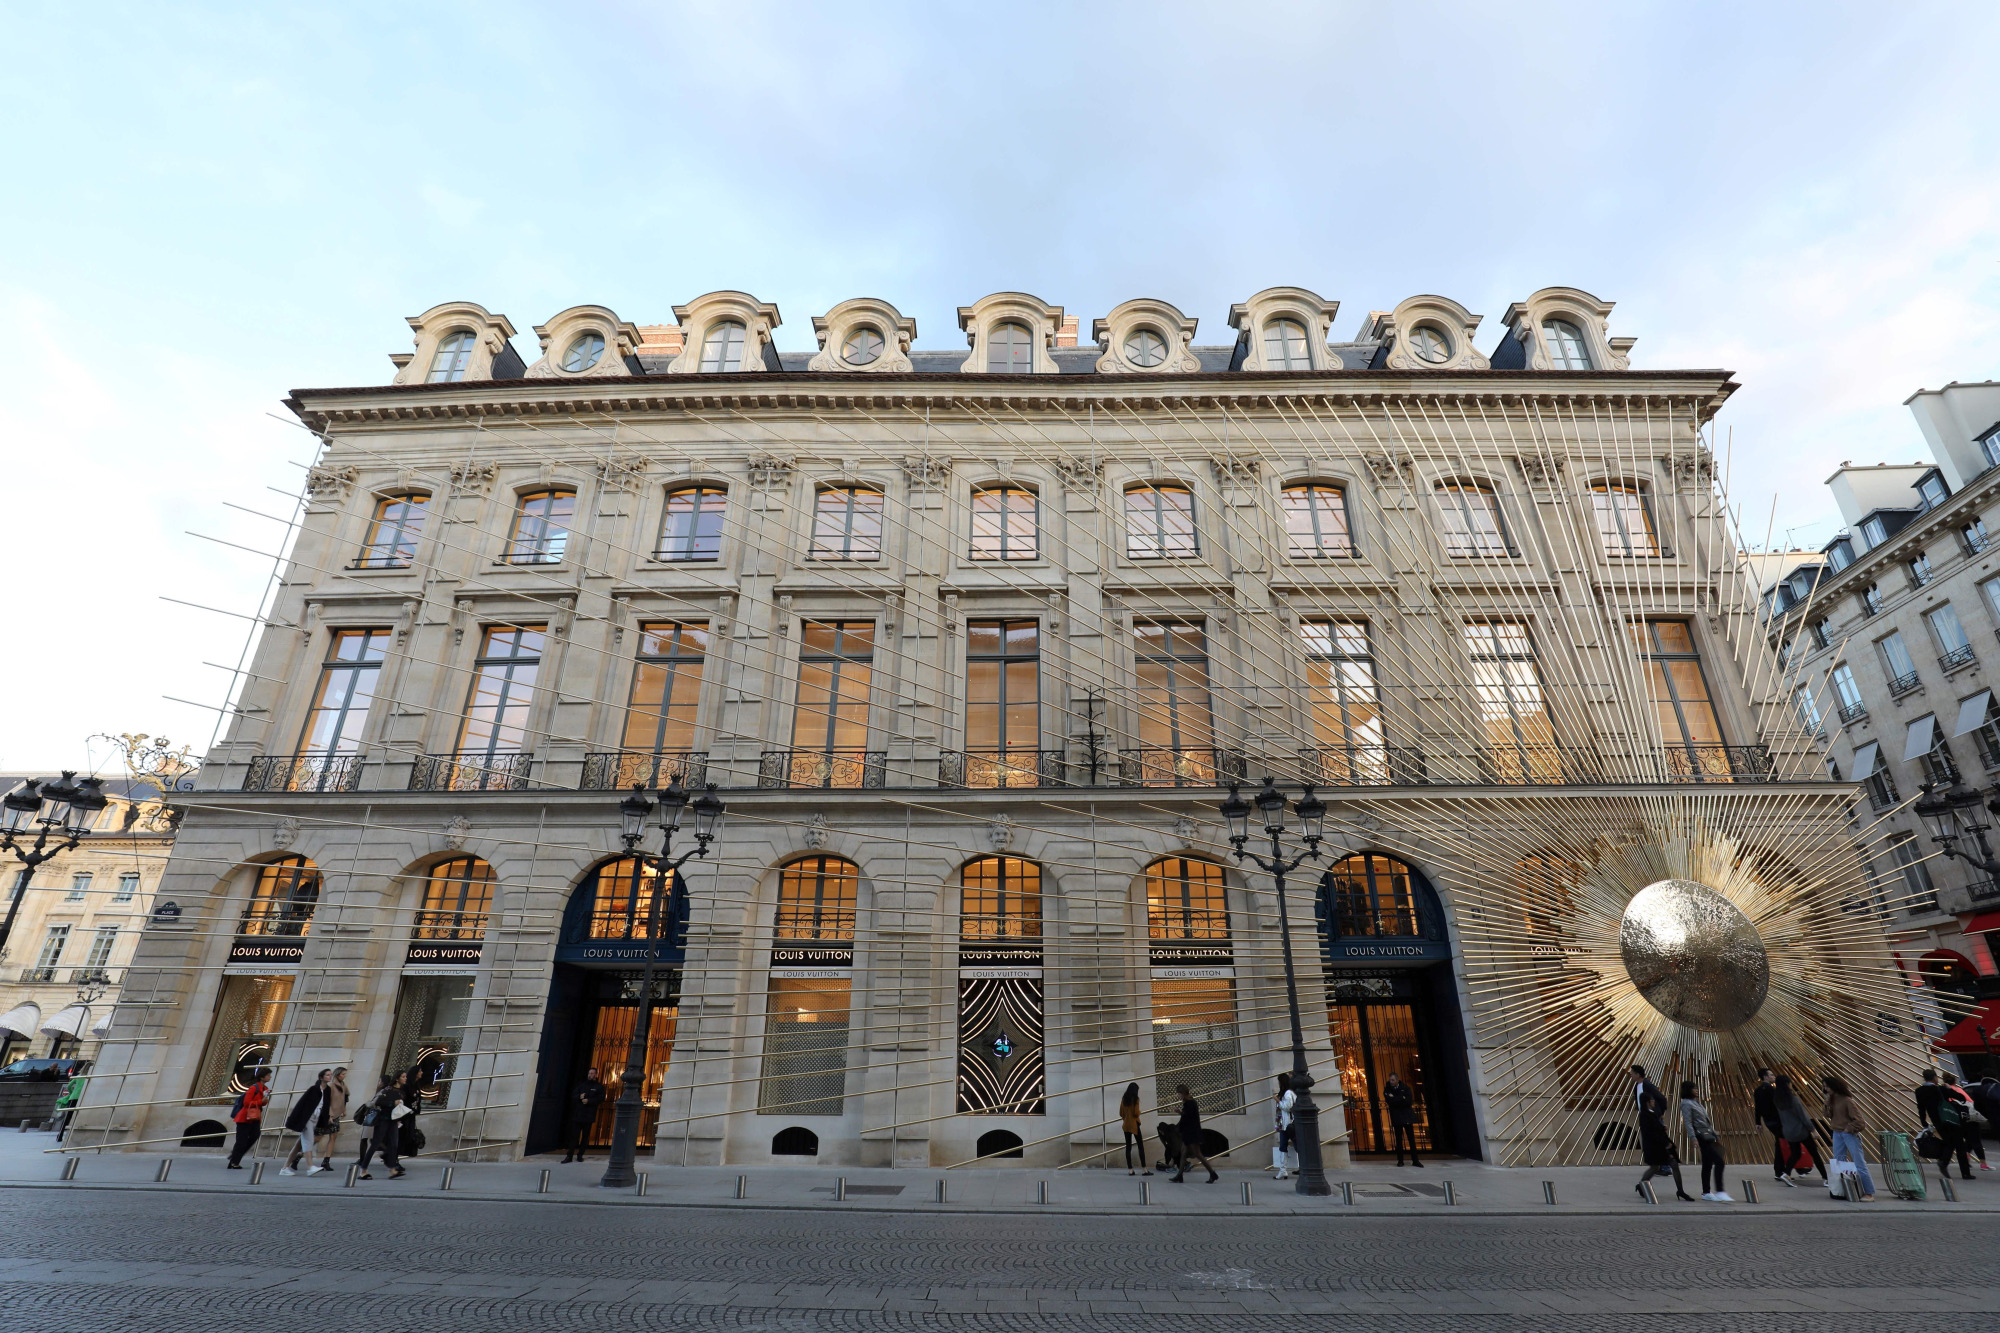 Louis Vuitton's Paris headquarters will become a hotel: Travel Weekly